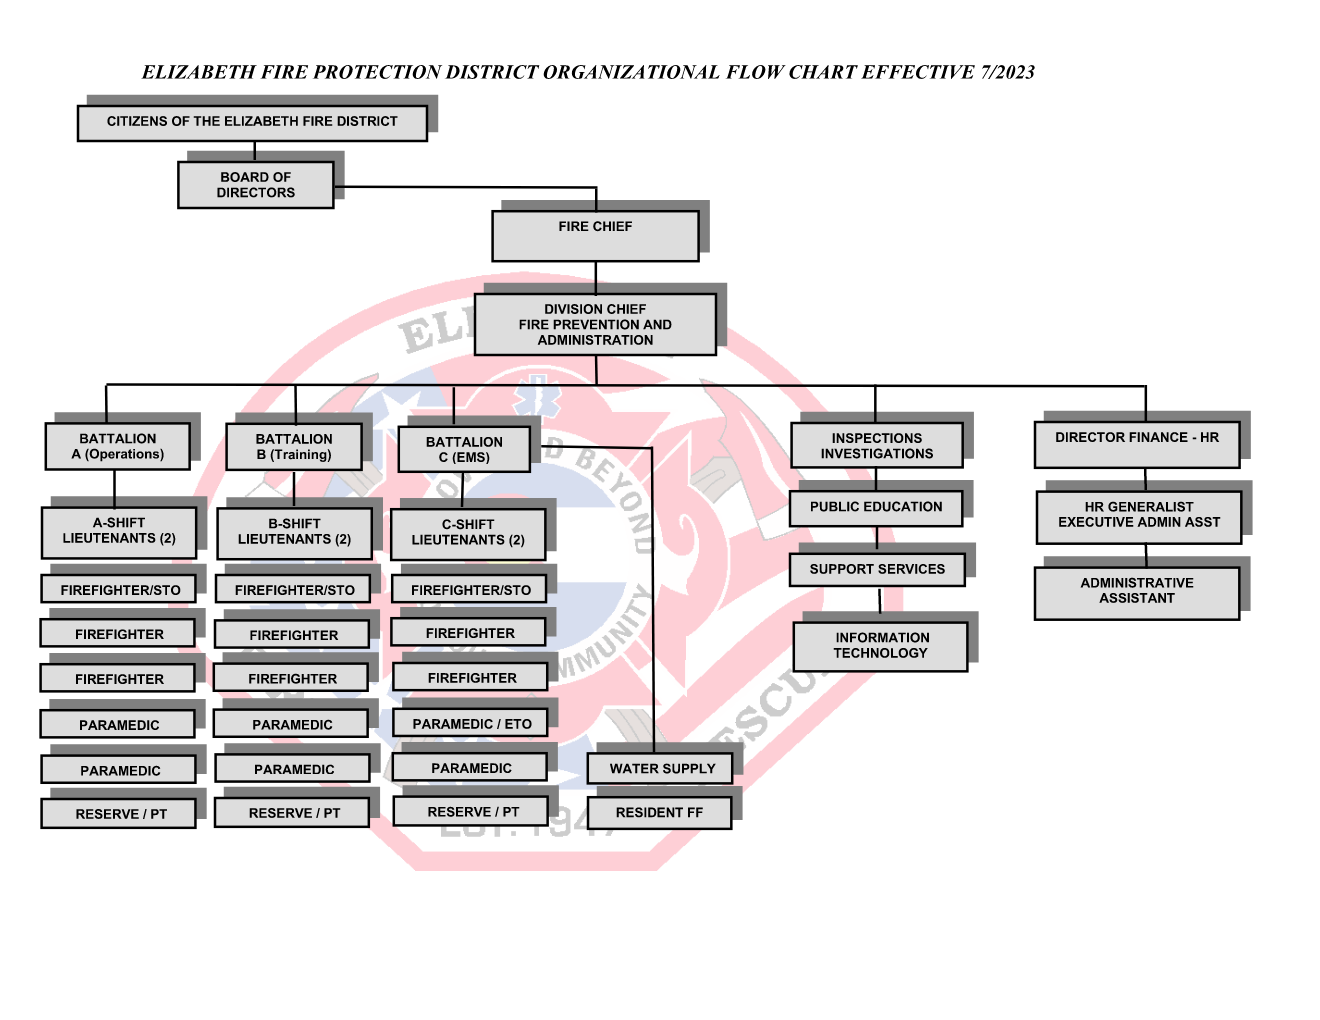 Organizational chart of the District's employees